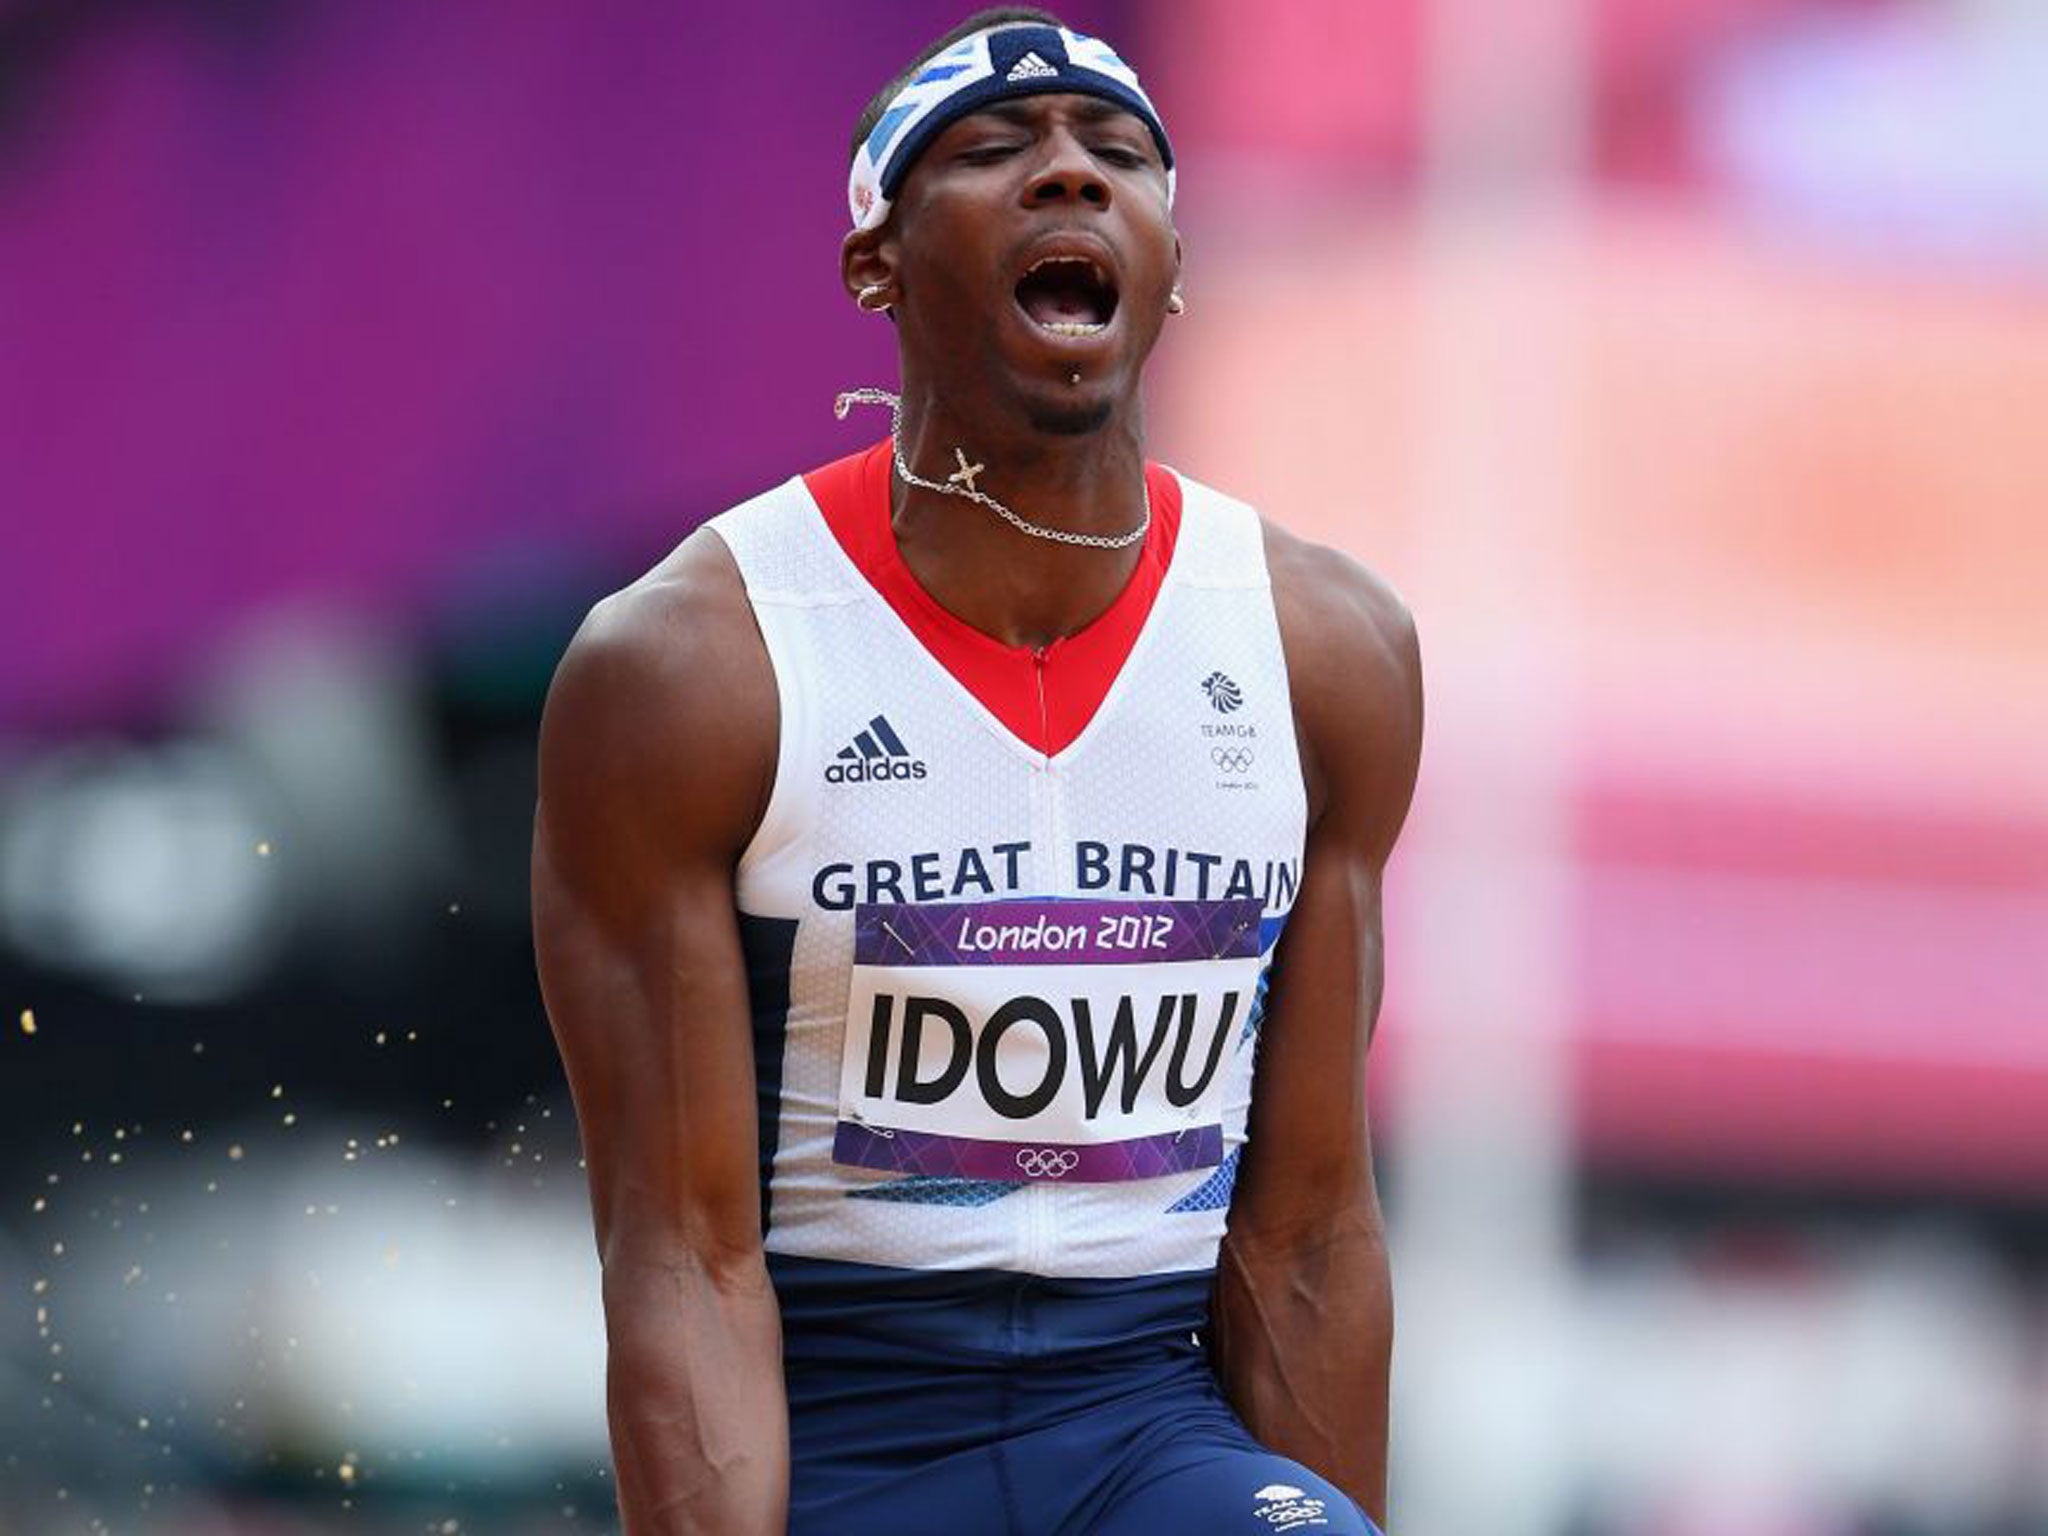 Phillips Idowu shows his frustration at the Olympics last year